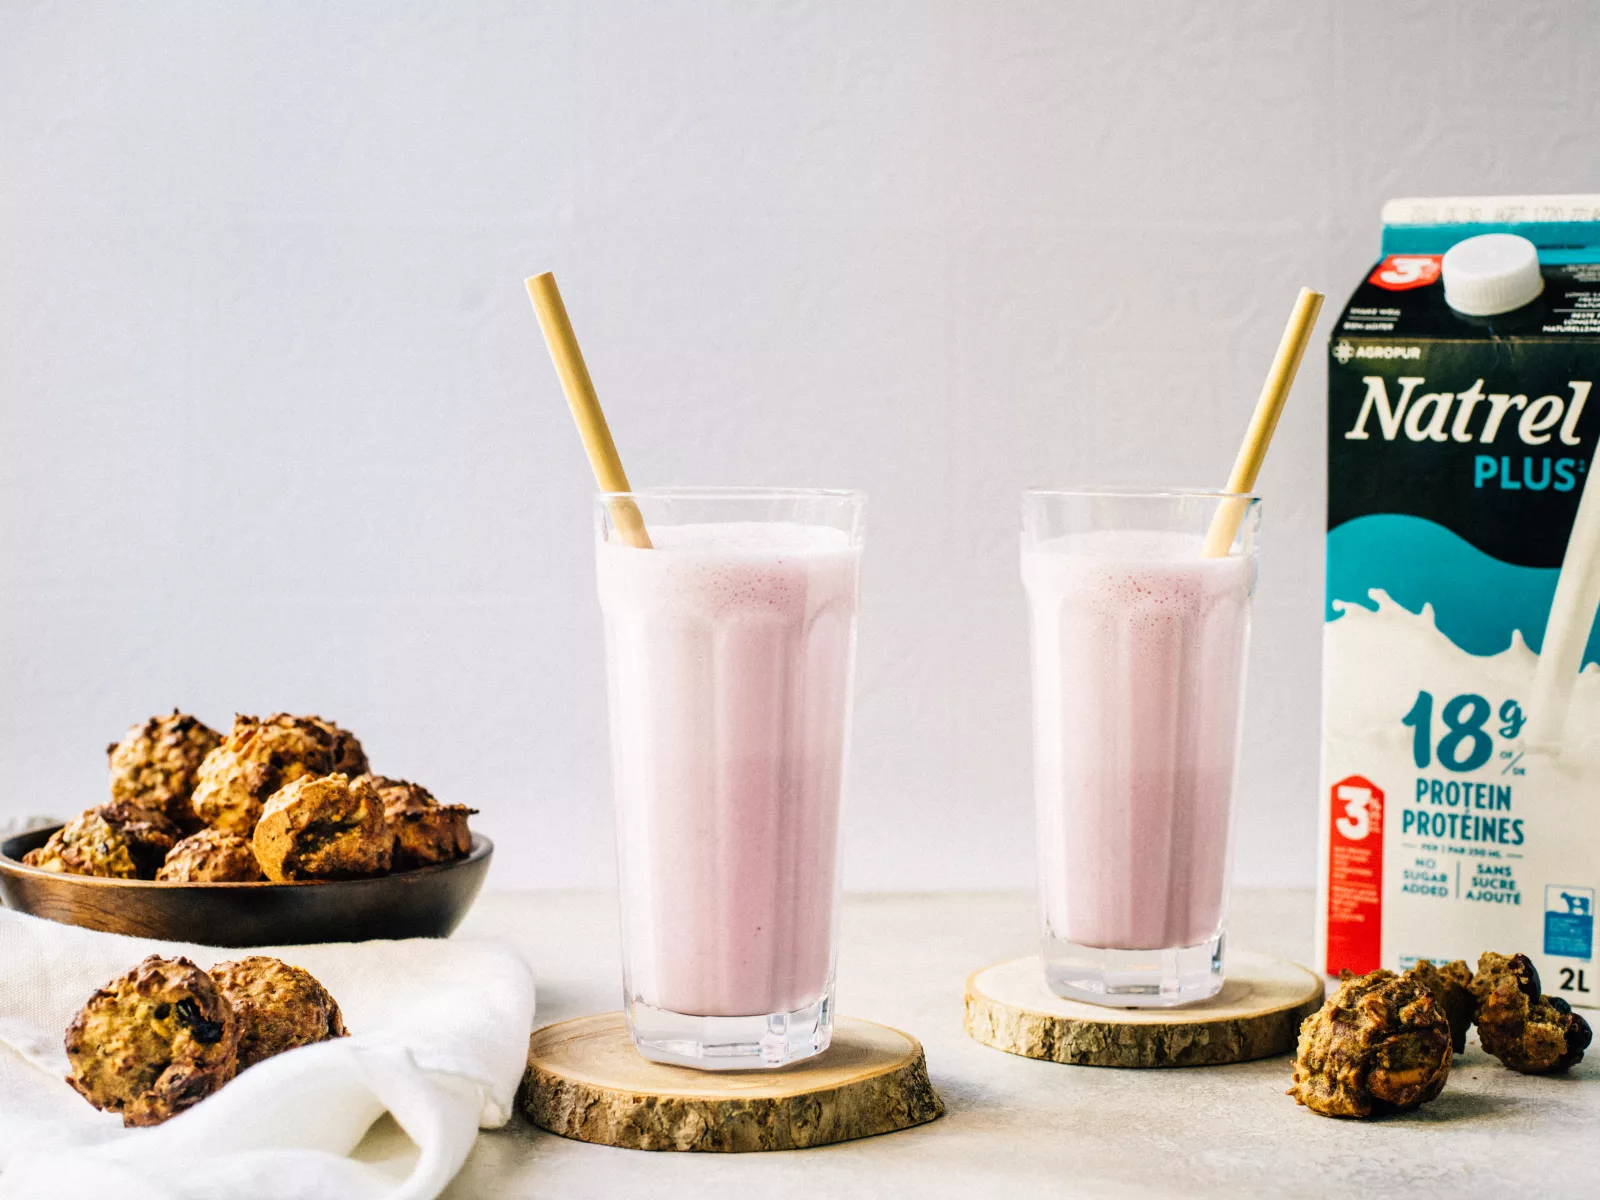 Protein milkshake with strawberries & muffin bites for dipping